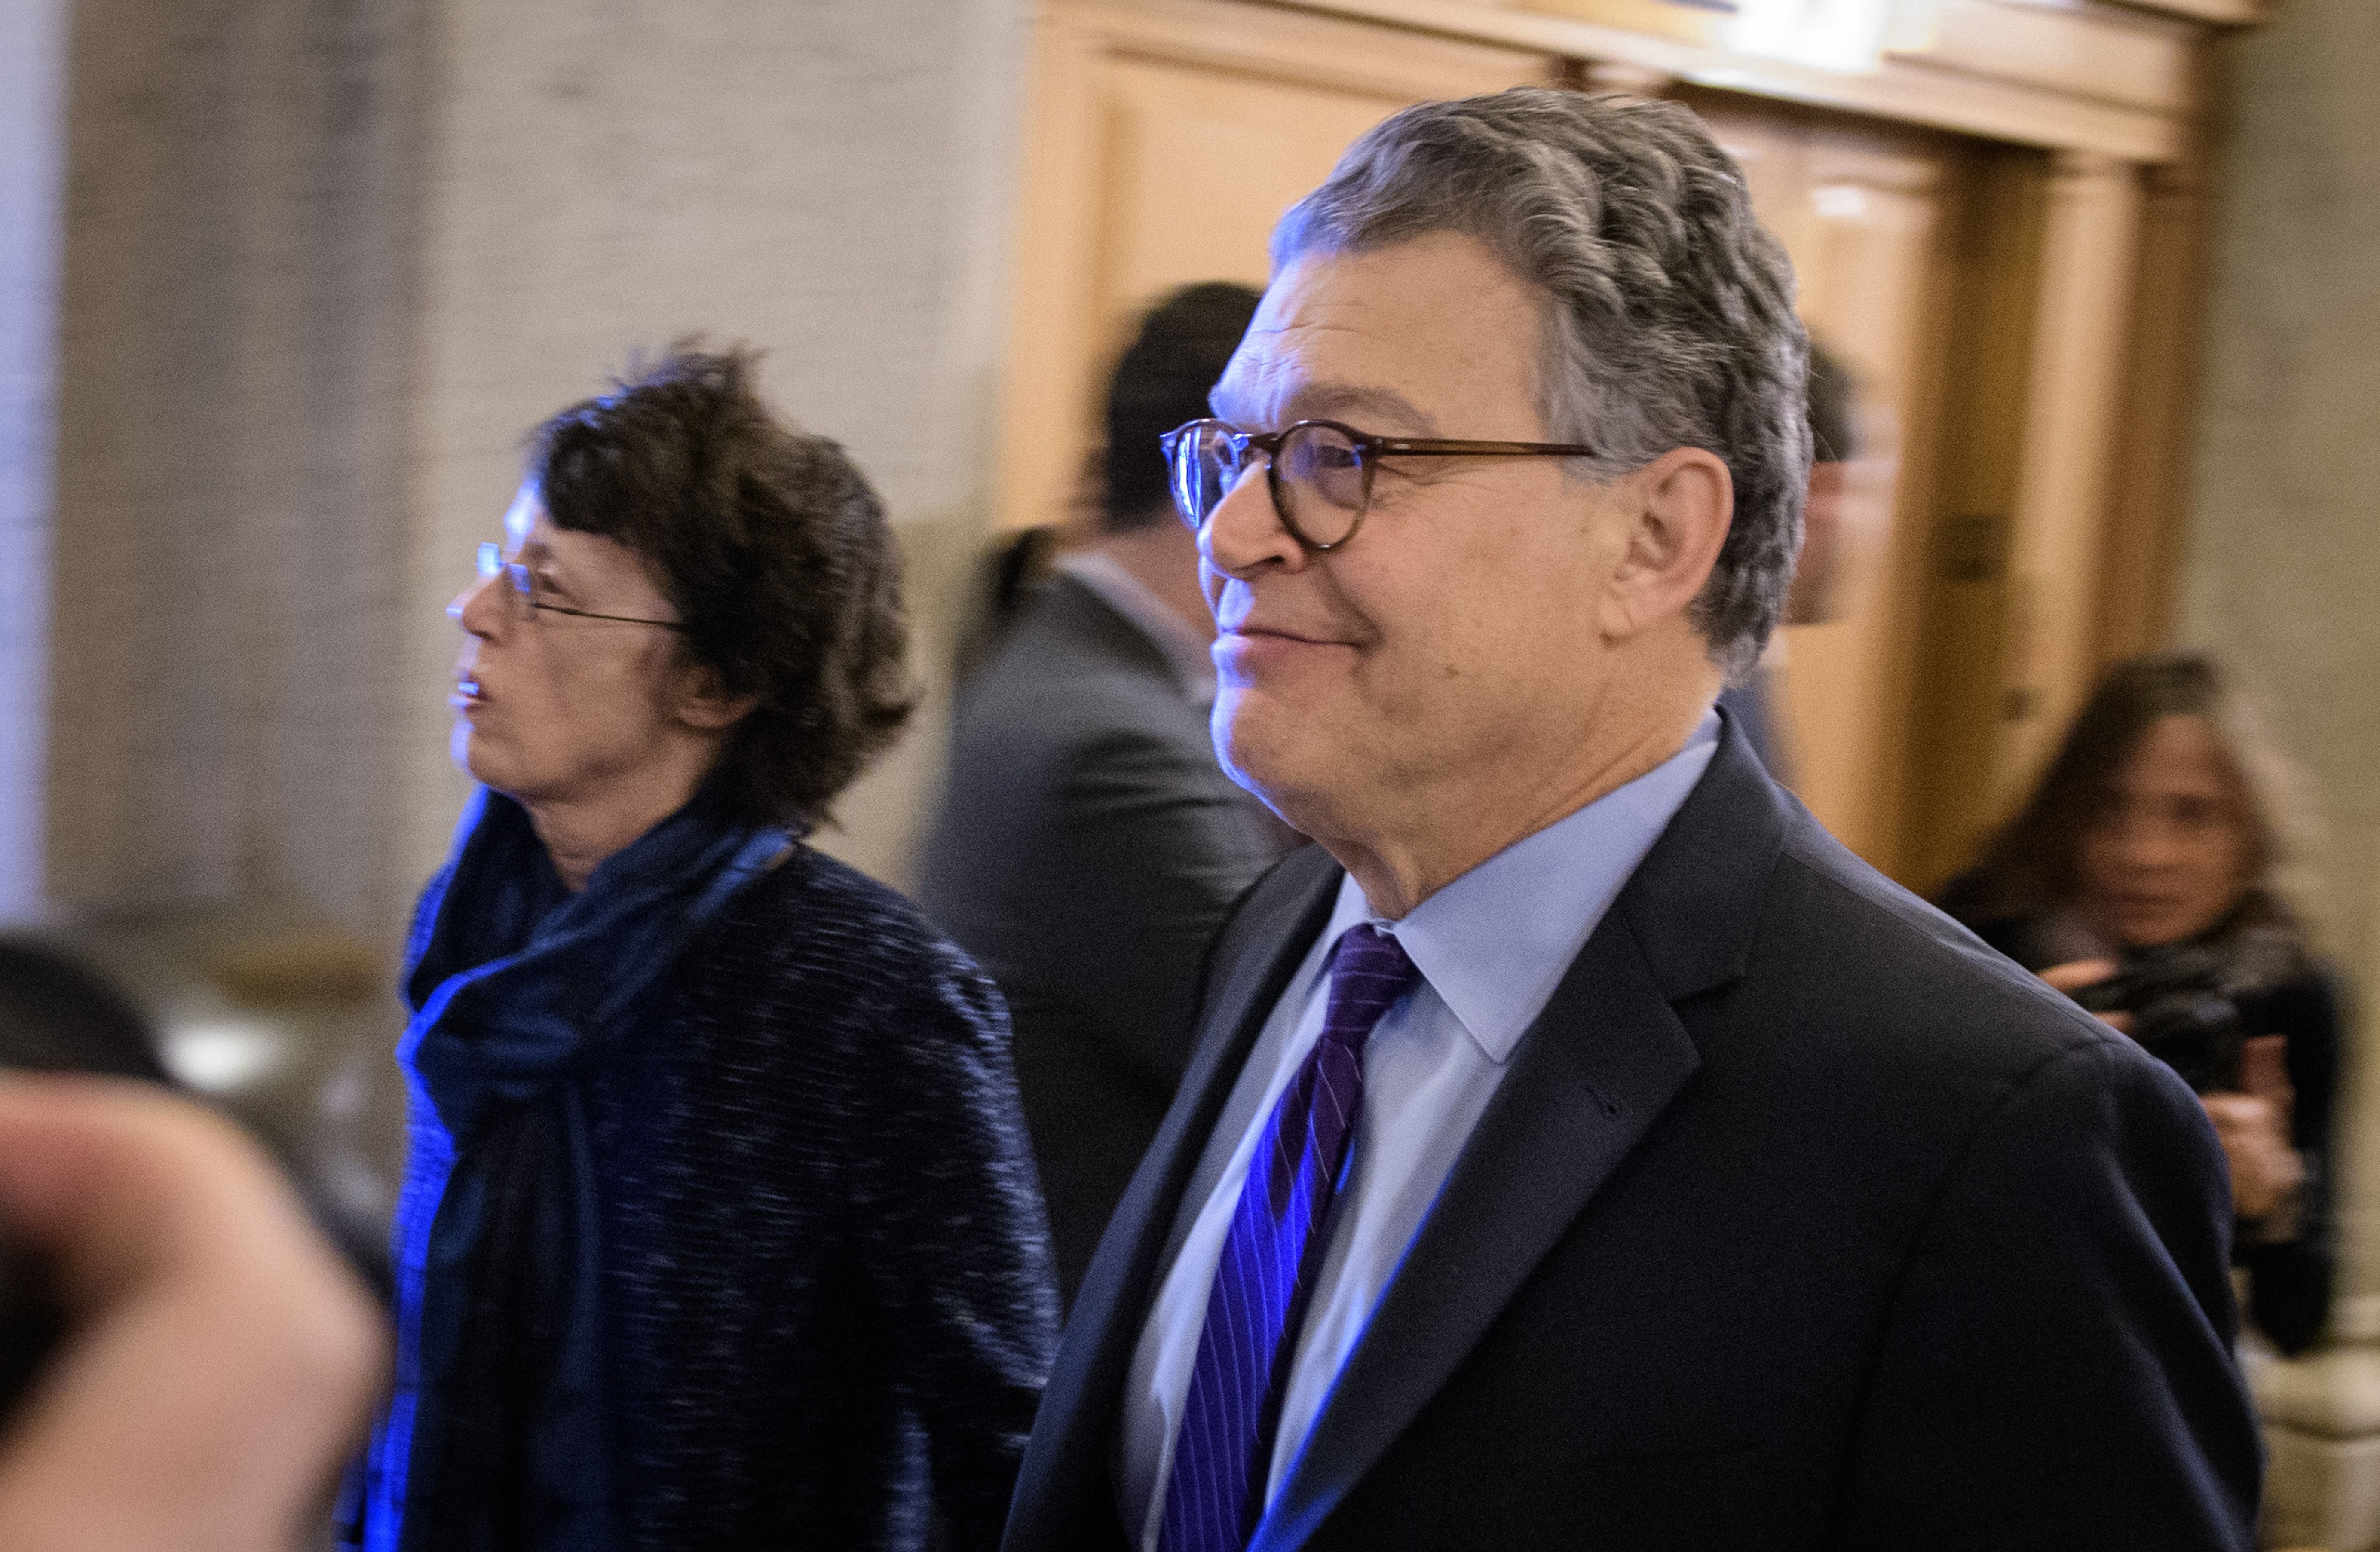 Senator Al Franken, D-MN, and his wife Franni Bryson (L) arrive at the US Capitol on December 7, 2017 in Washington, DC. Franken announced that he will be resigning in the coming weeks. Franken -- a former comedian who made his name on the popular late-night comedy show 'Saturday Night Live' before turning to politics -- has acknowledged misconduct with at least one accuser. The 66-year-old Minnesota lawmaker apologized last month and vowed to work to regain the trust of his colleagues and voters. / AFP PHOTO / MANDEL NGAN (Photo credit should read MANDEL NGAN/AFP/Getty Images)